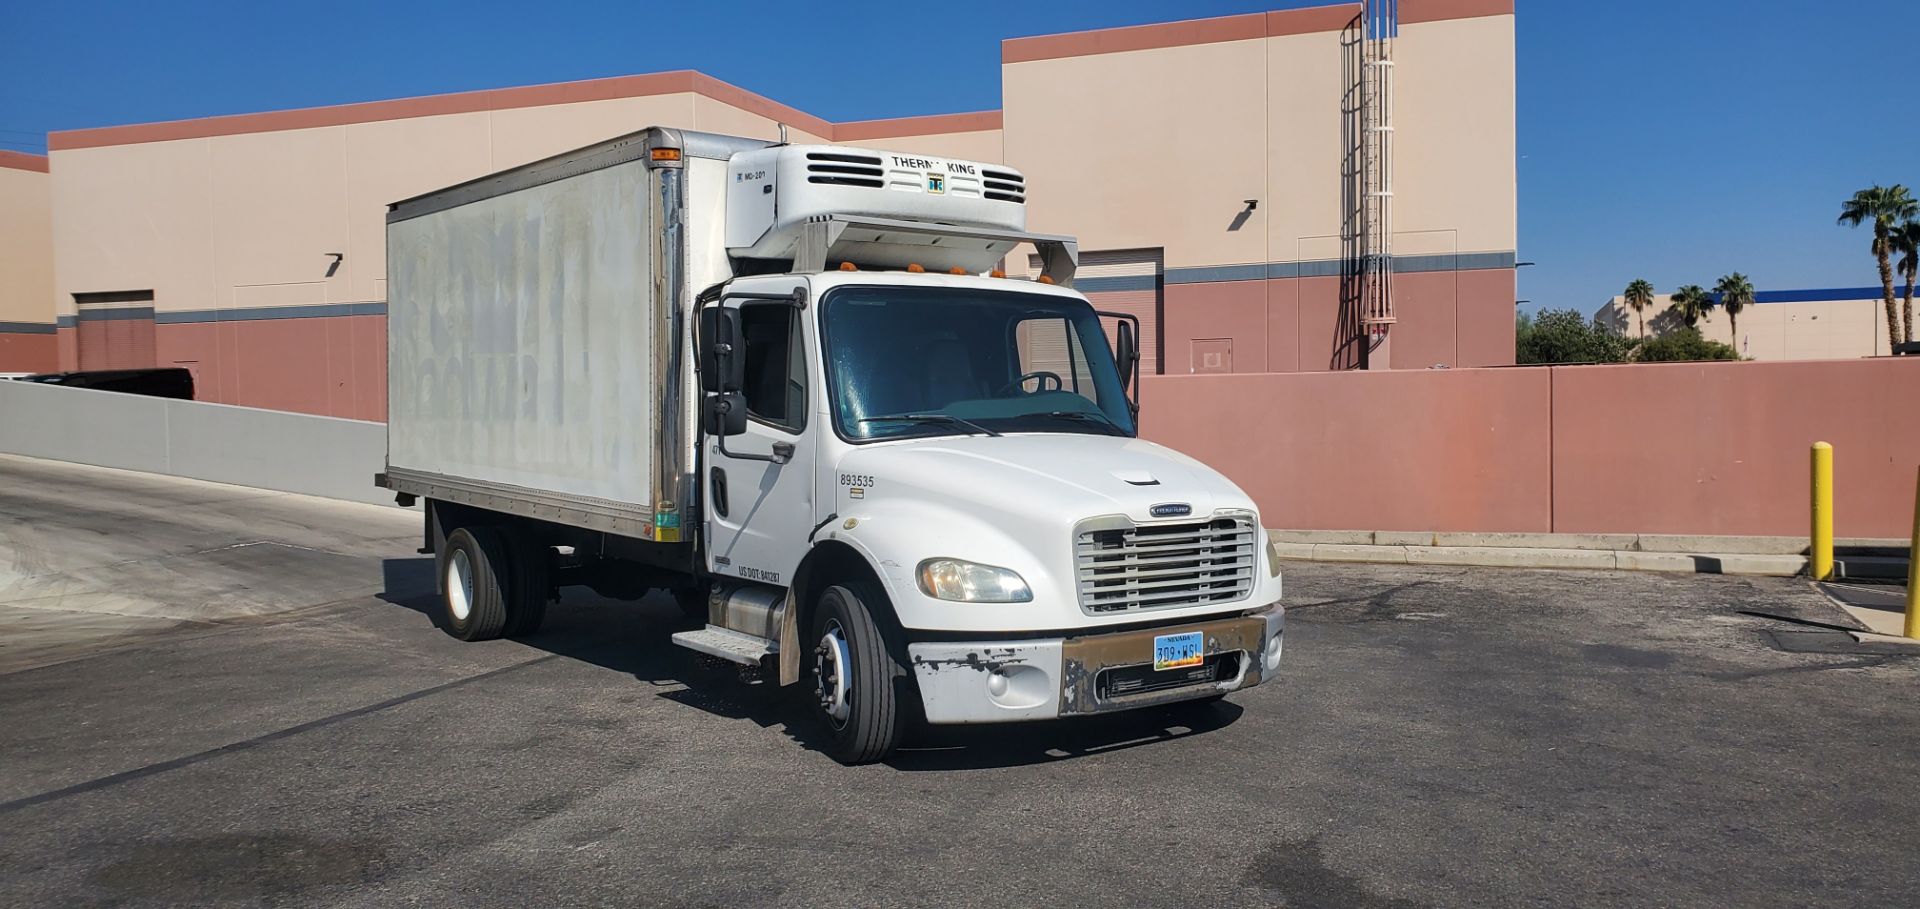 2005 Freightliner refrigerated truck - Image 2 of 11